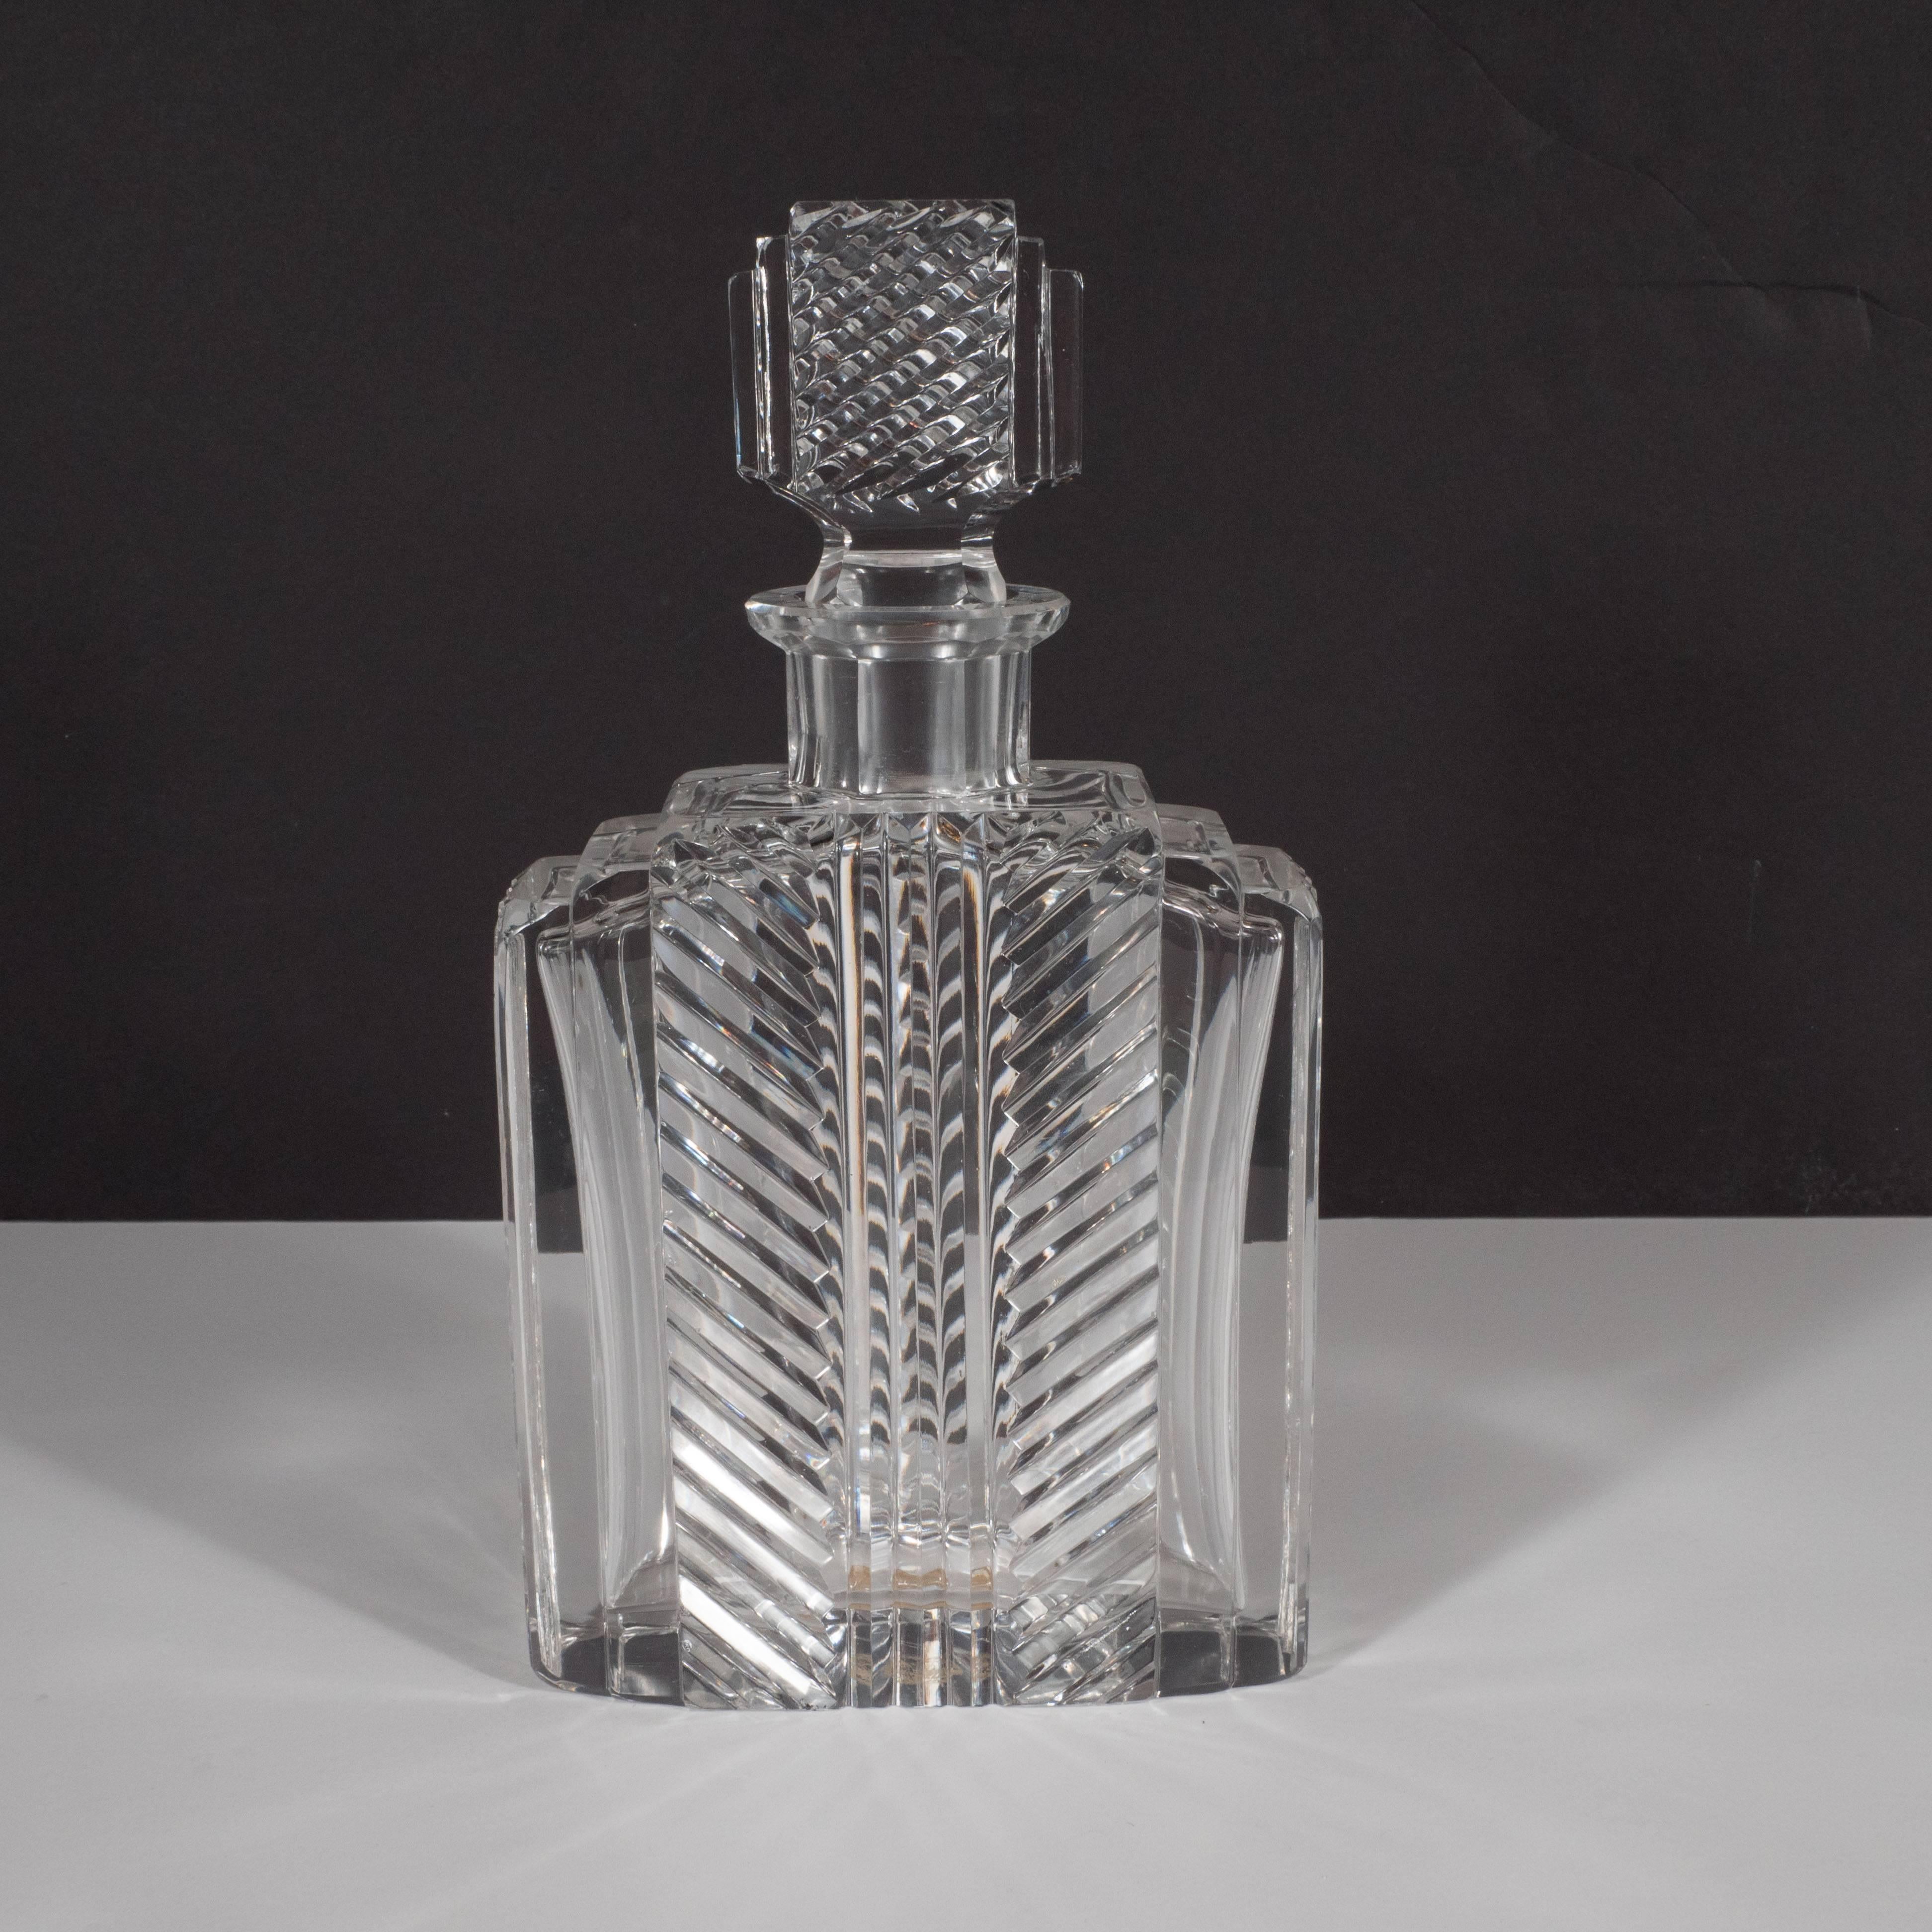 This exquisite Art Deco crystal decanter was realized in Salzburg, Austria by the illustrious maker Rasper & Sohne, circa 1930. It features three tiers stepped and bevelled glass that meets a pyramidally reeded channel in the centre. Two rows of